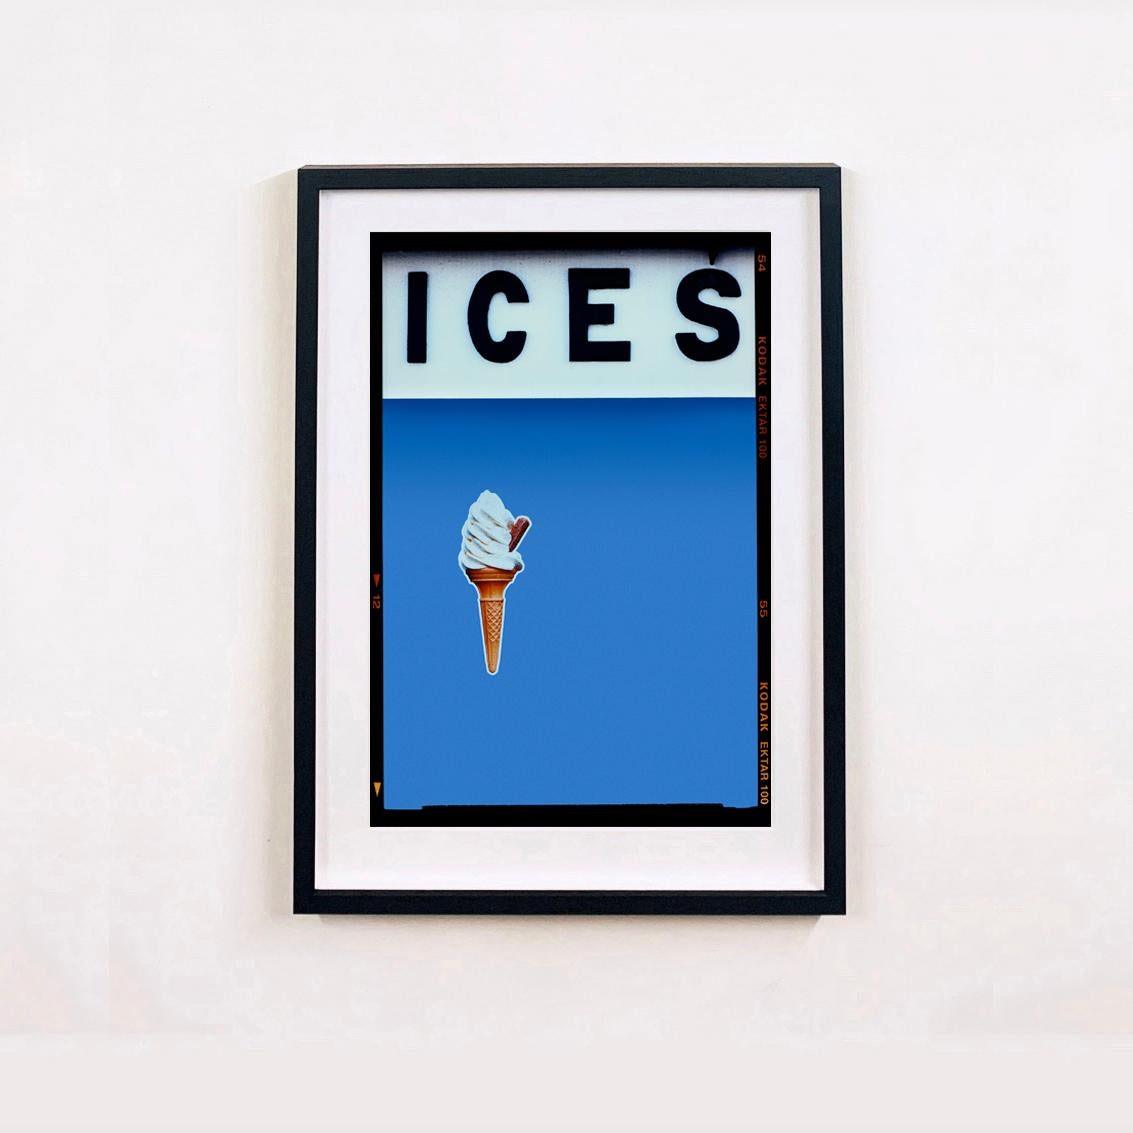 Ices (Baby Blue), Bexhill-on-Sea - British seaside color photography - Print by Richard Heeps